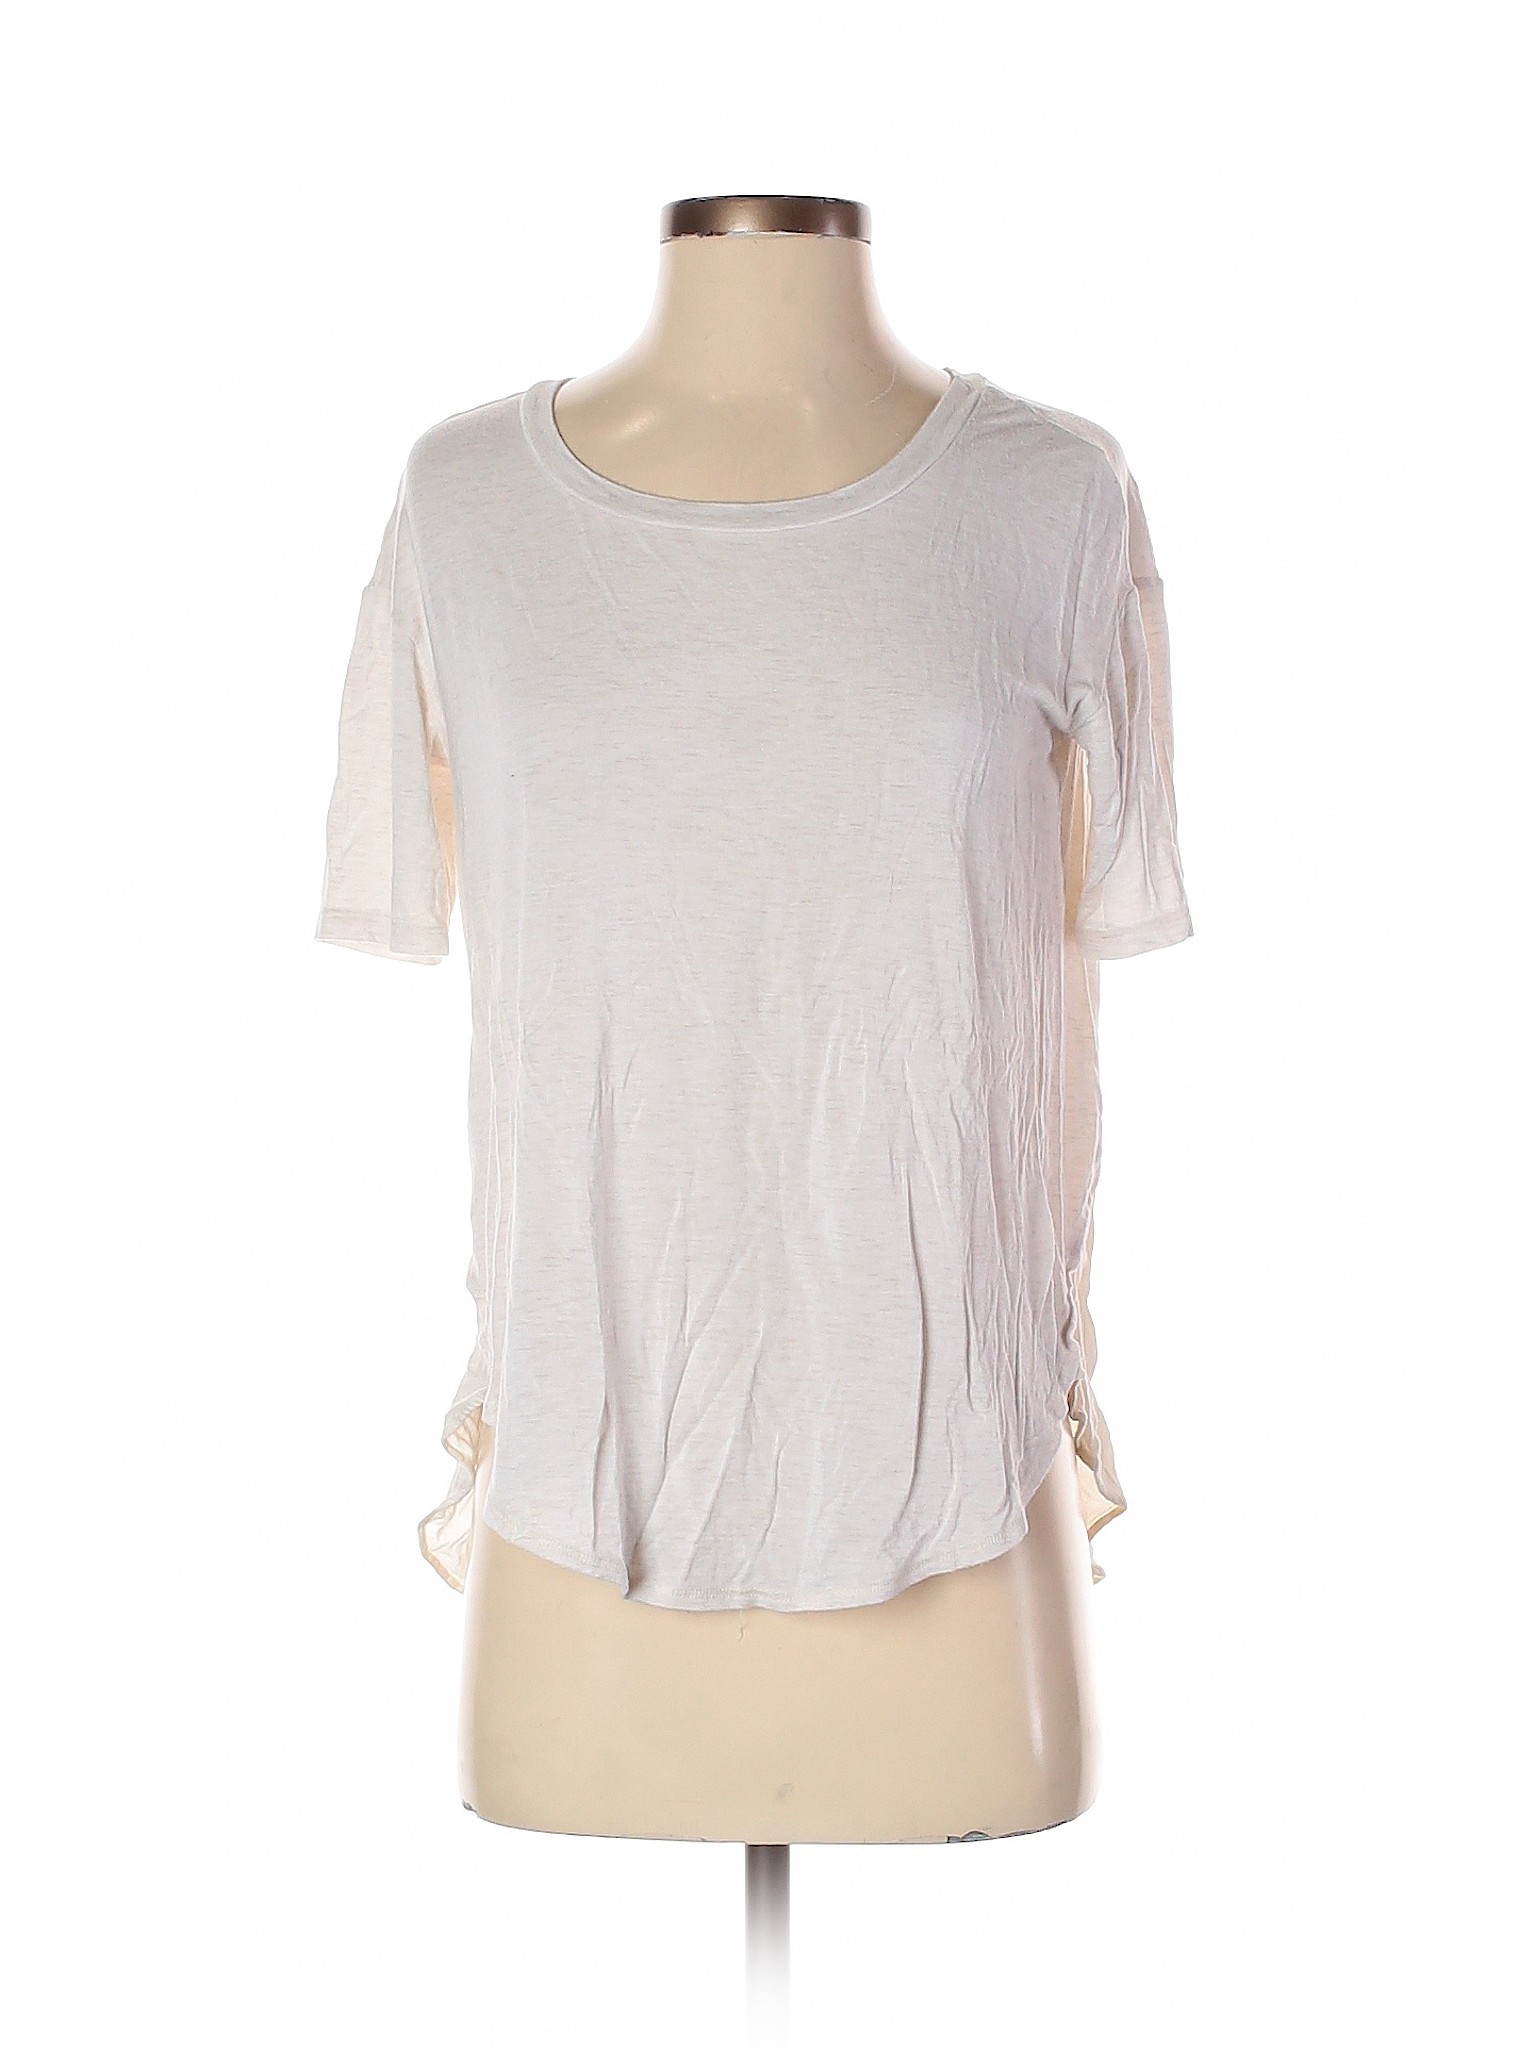 American Eagle Outfitters Women White Short Sleeve T-Shirt XS | eBay